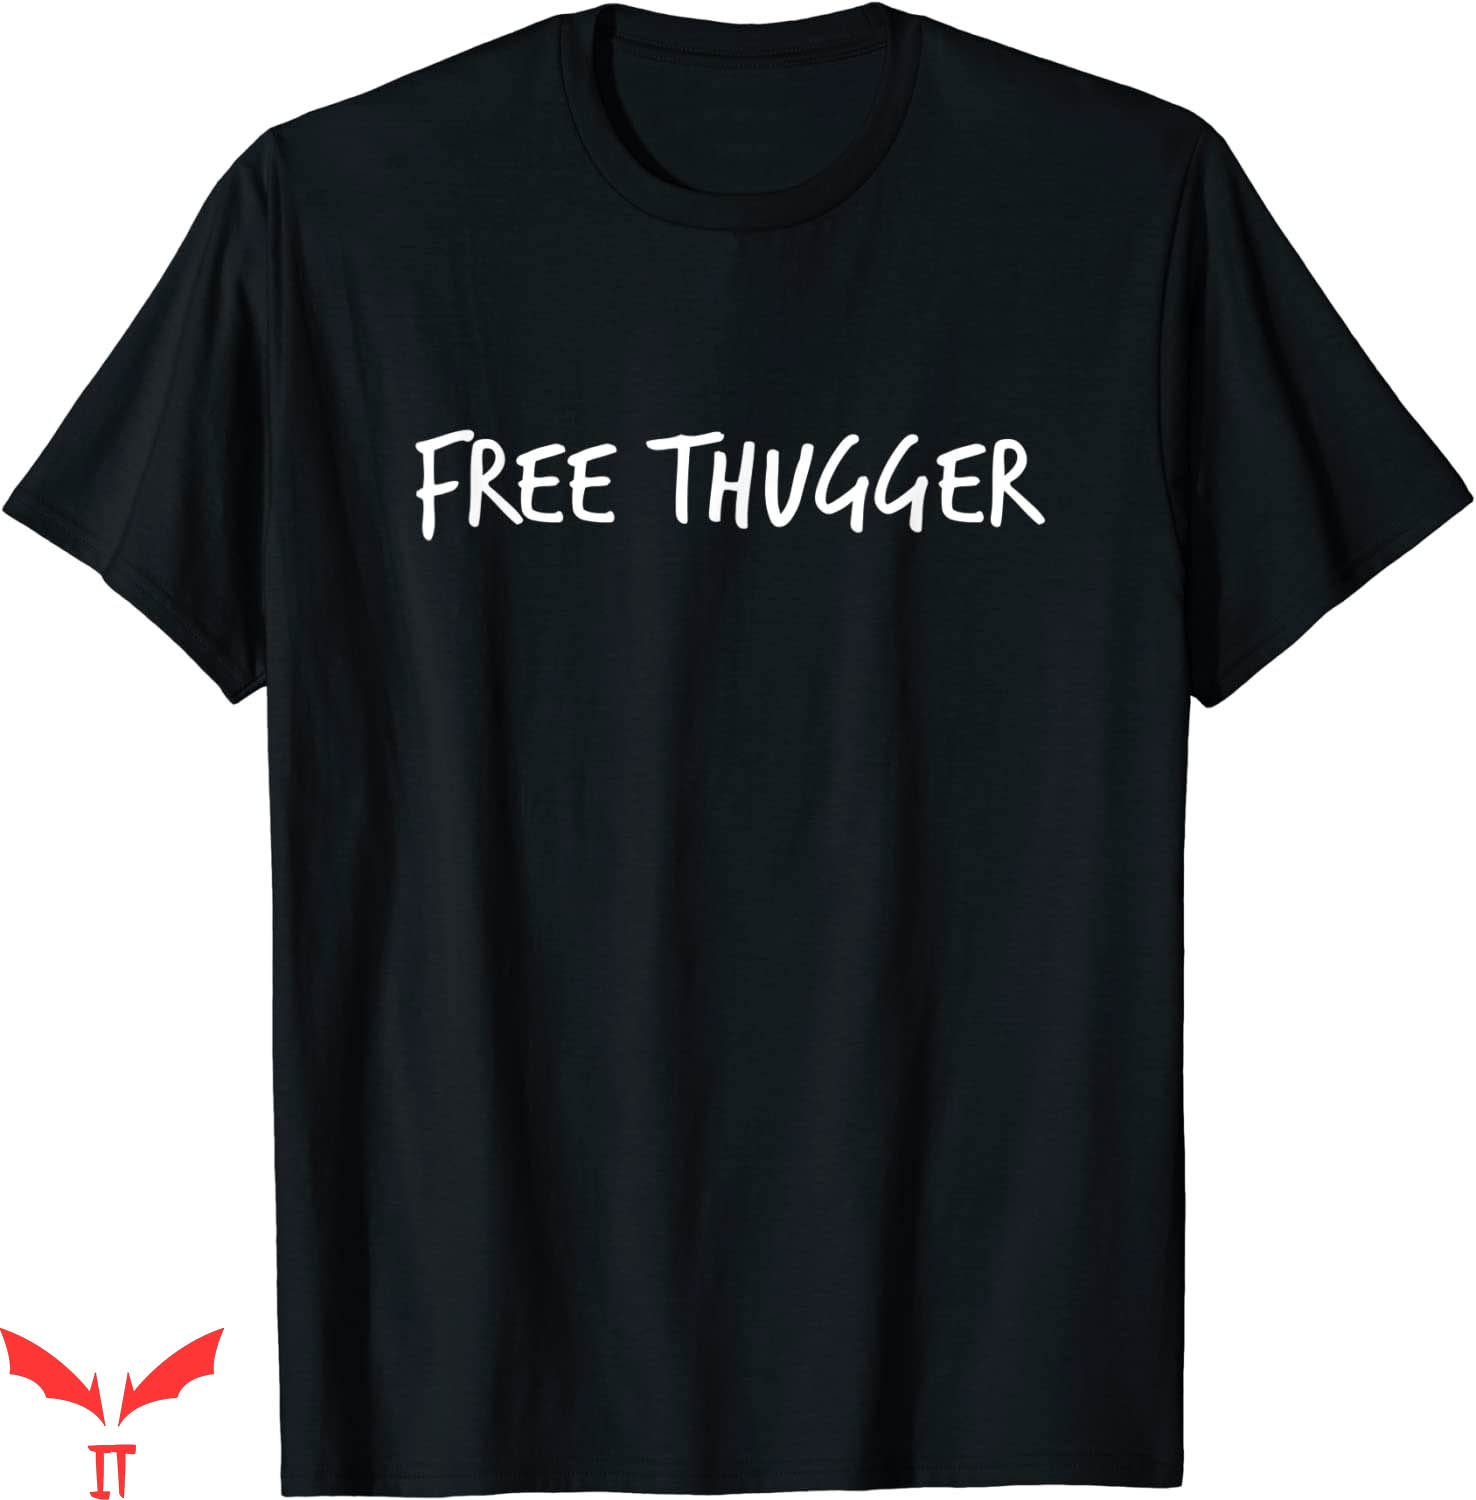 Free Thugger T-Shirt Cool Quote Trendy Design Tee Shirt